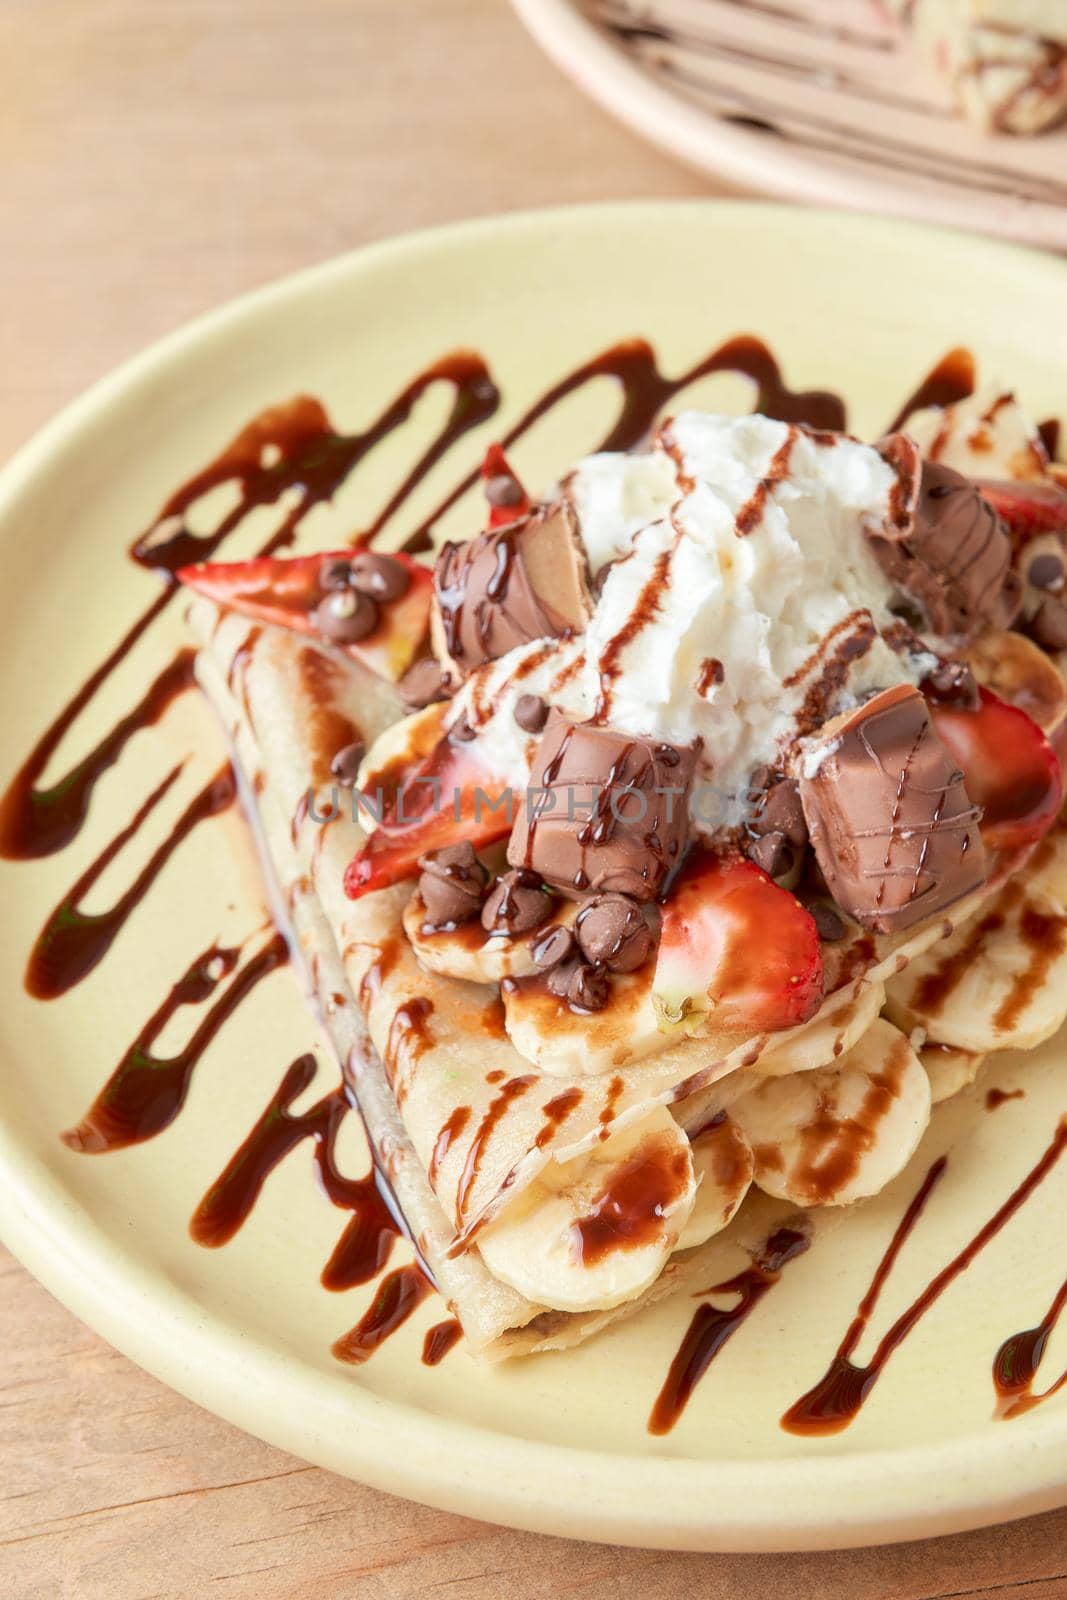 photo of delicious crepe with chocolate, banana, strawberries and whipped cream. sweet crepe.